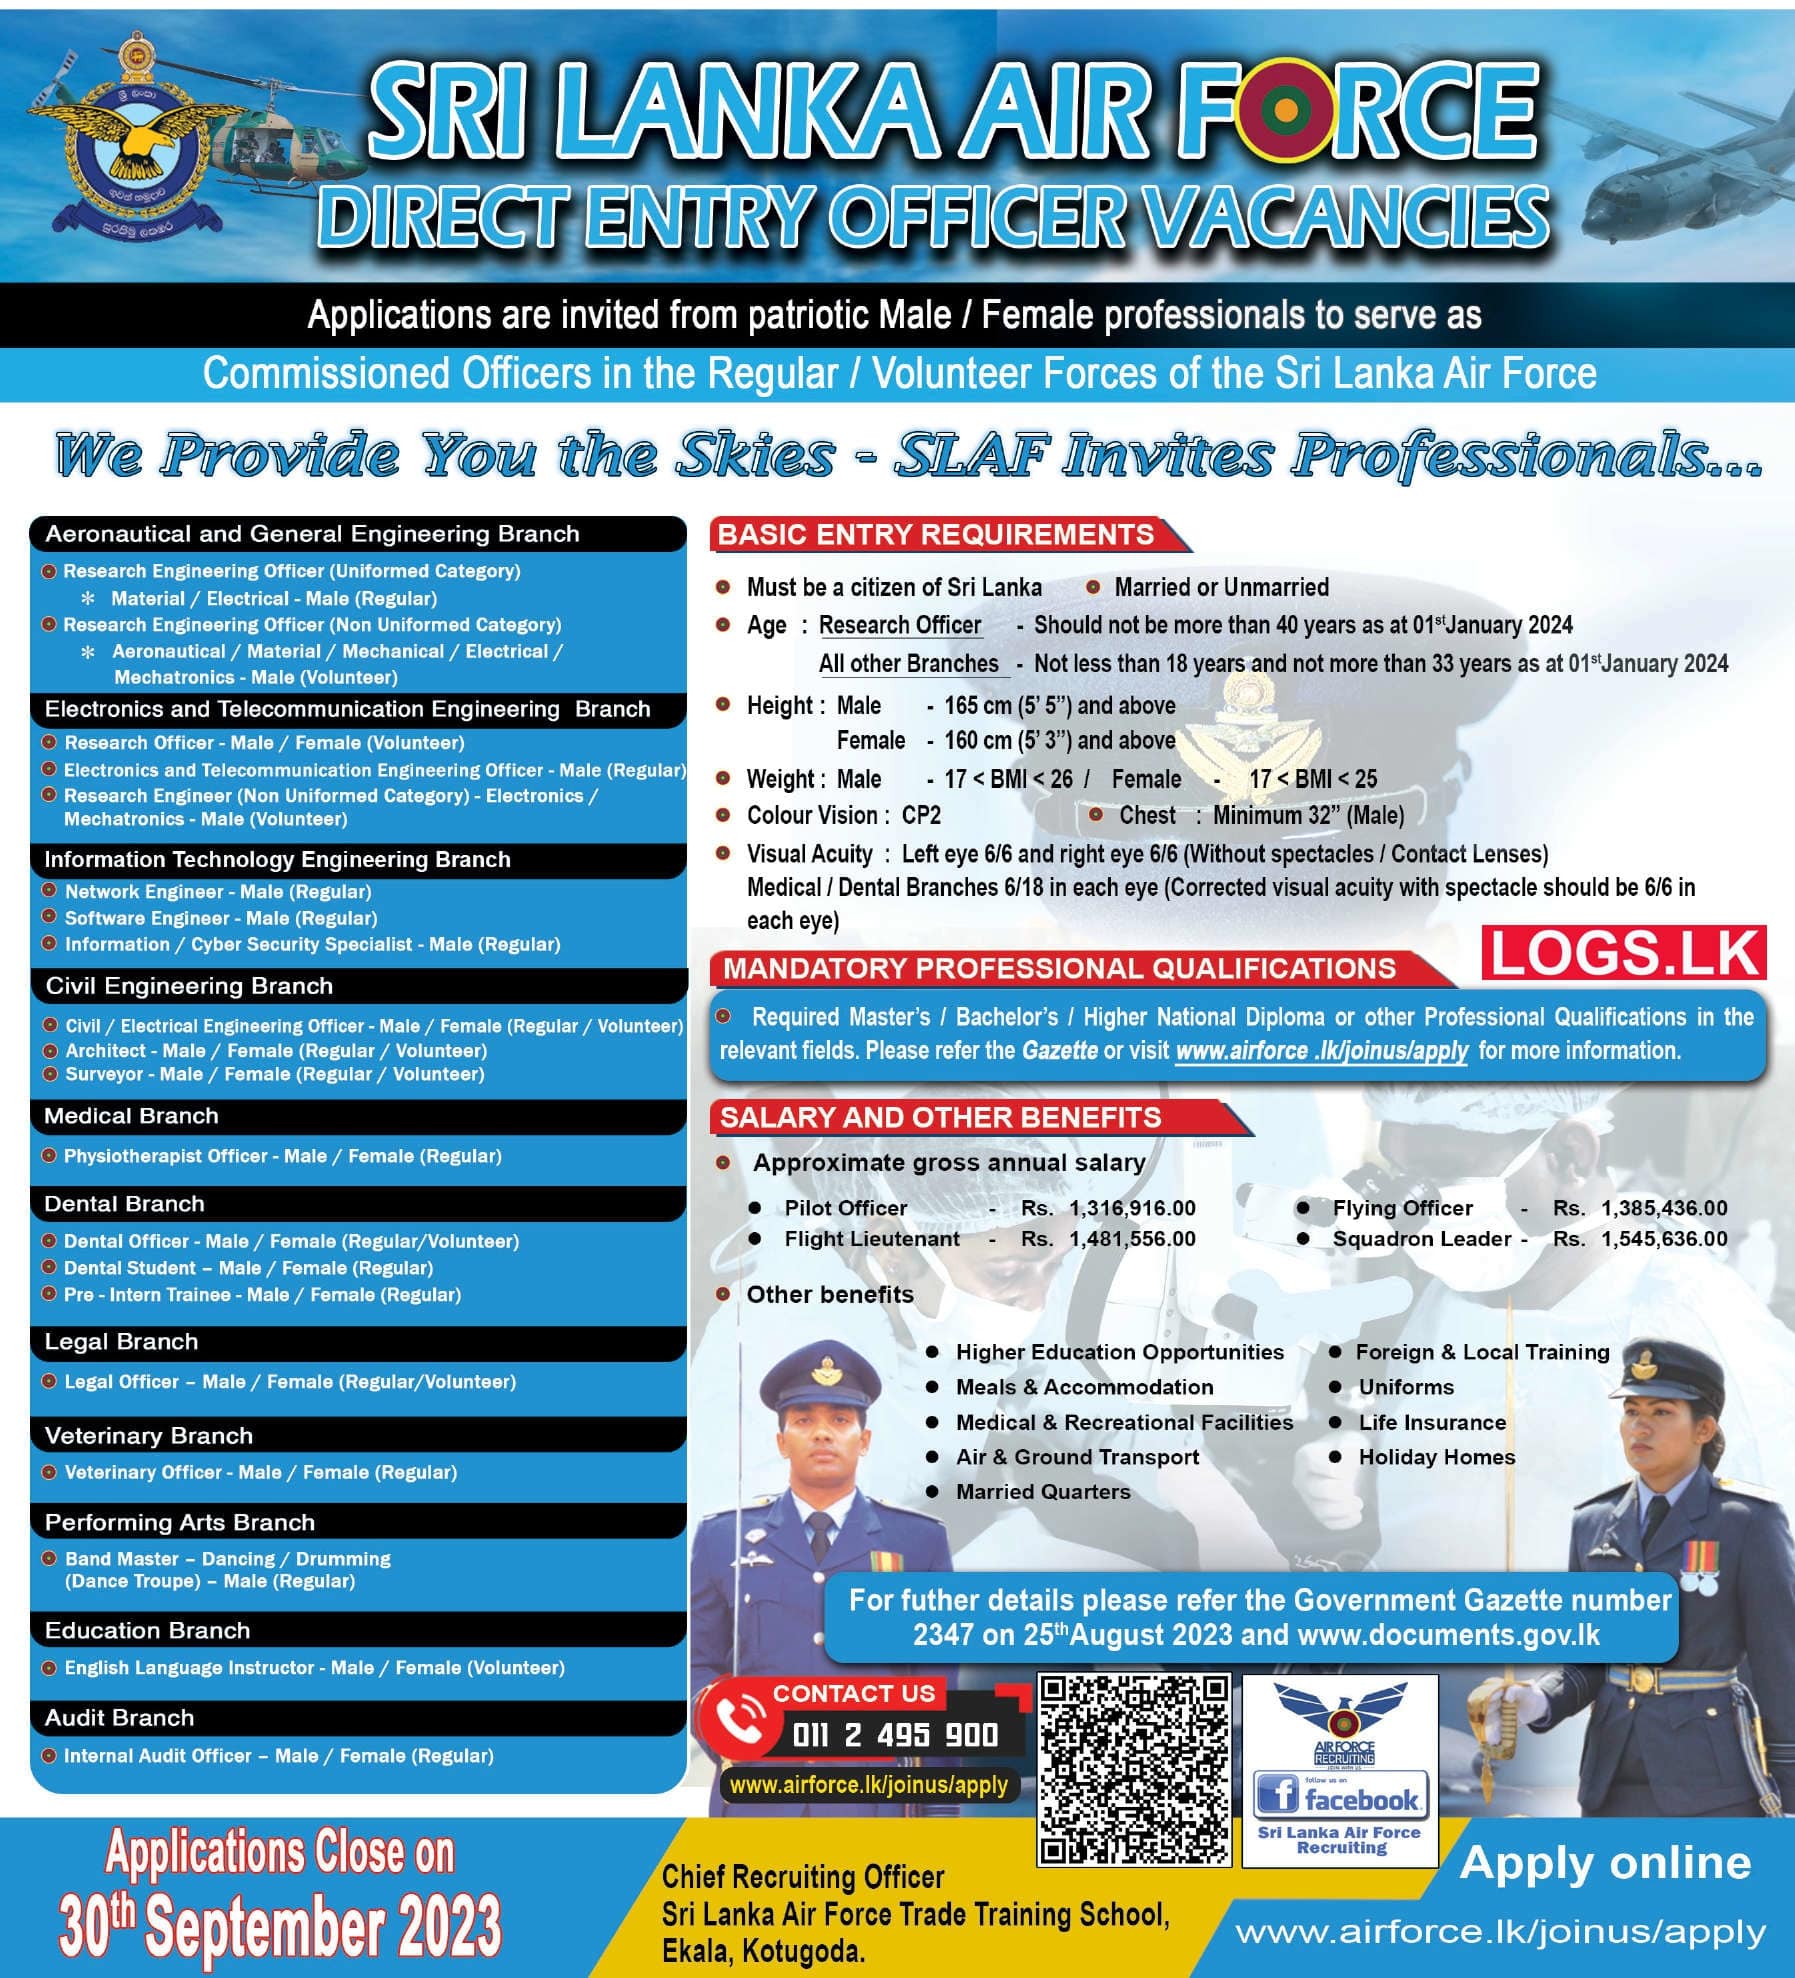 Sri Lanka Air Force Direct Entry Officer Vacancies 2023 Application Form, Details Download